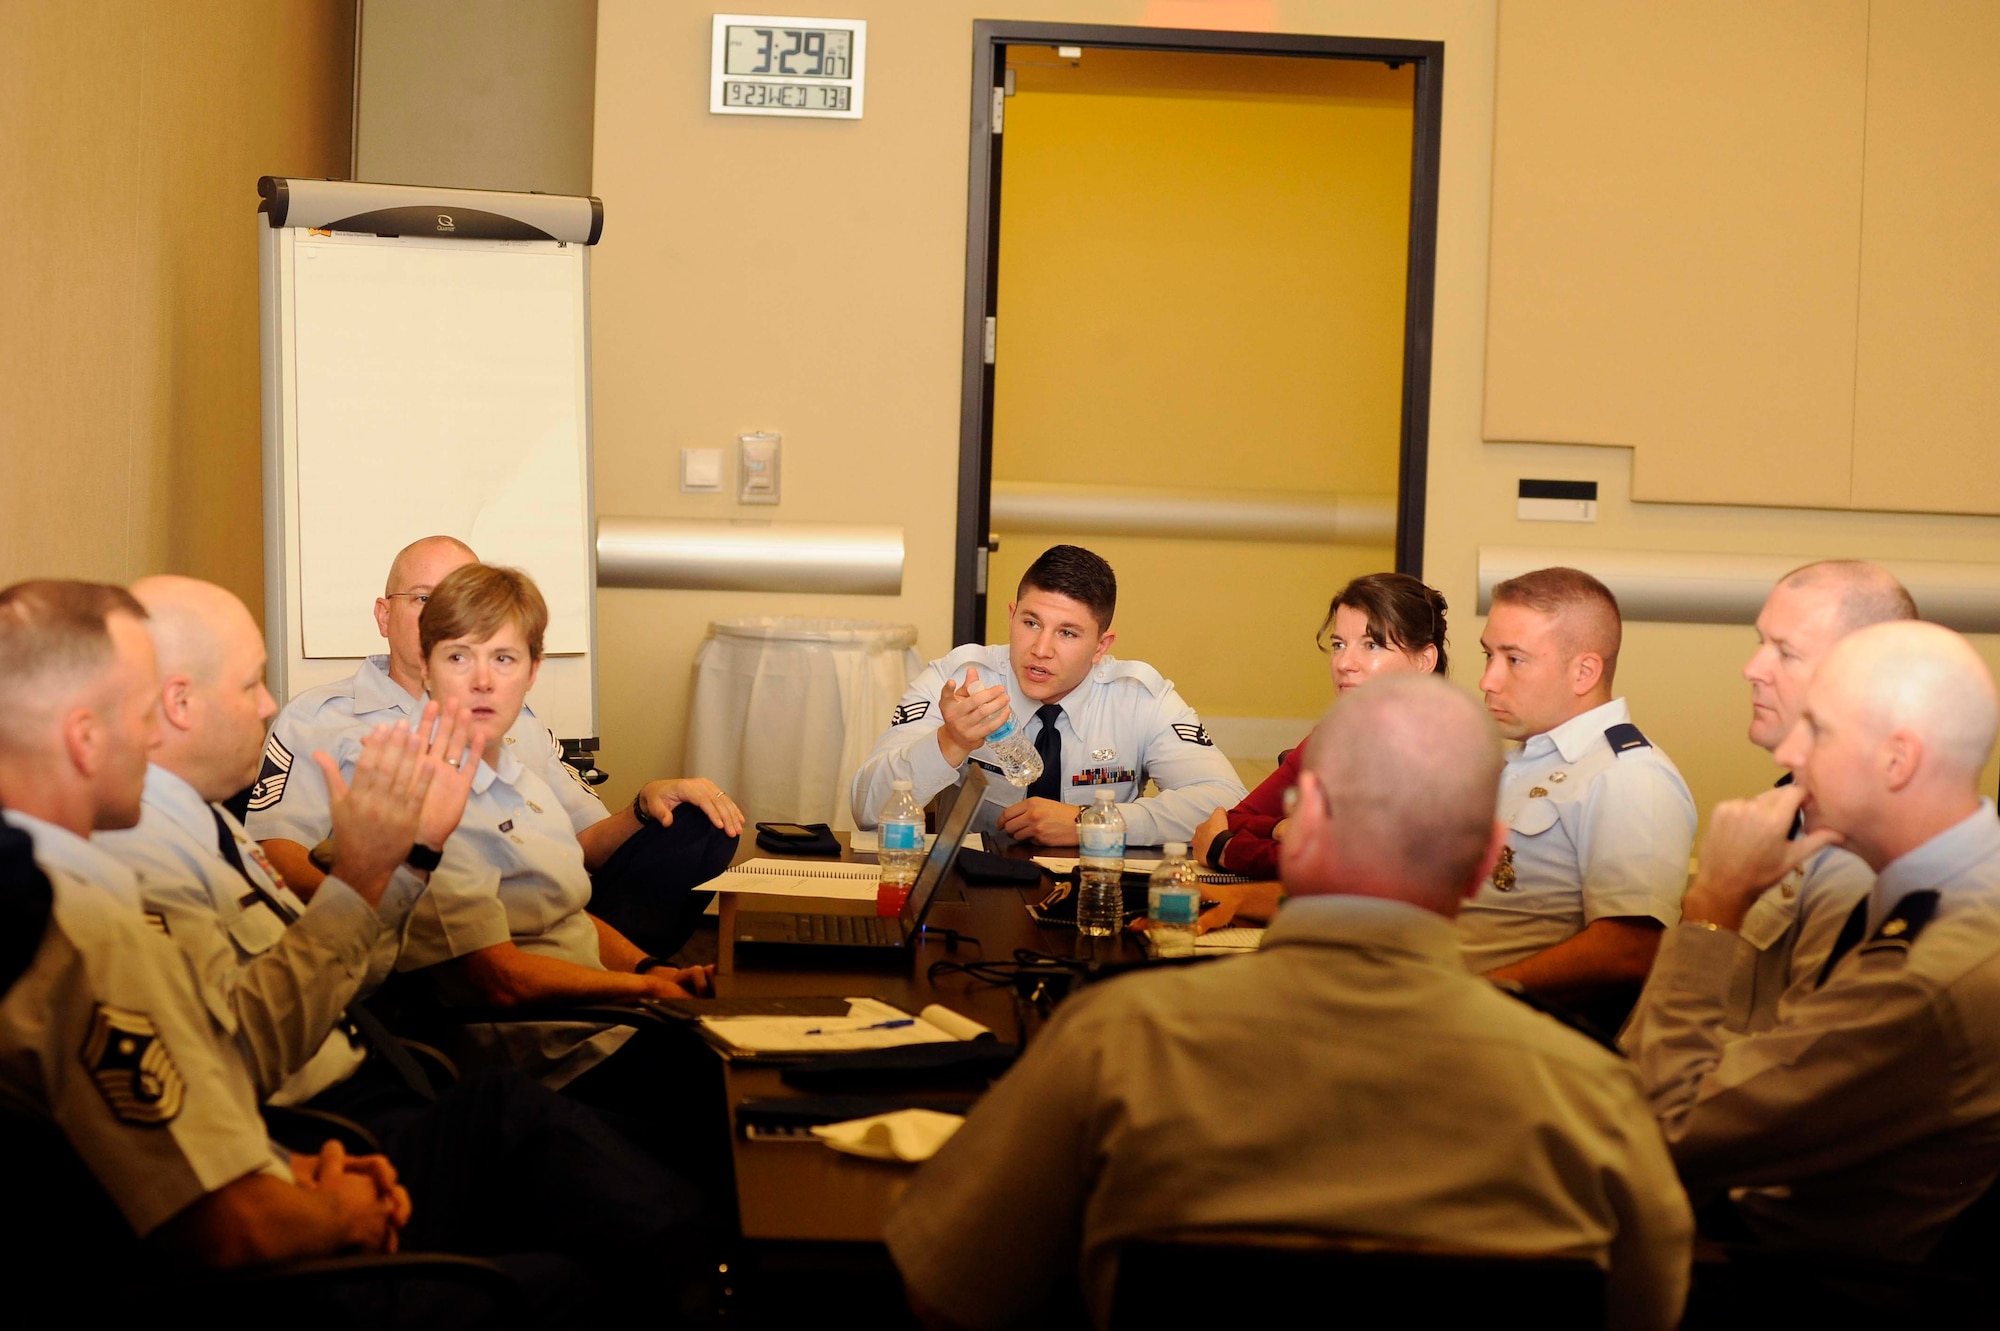 One group discusses a strategy on how to minimize suicides among Airmen during the Suicide Prevention Summit at Joint Base Andrews, Md., Sept. 24, 2015. After the three-day training, each group presented their ideas to the chief of staff and vice chief of staff of the Air Force. (Air Force photo/Staff Sgt. Whitney Stanfield)  